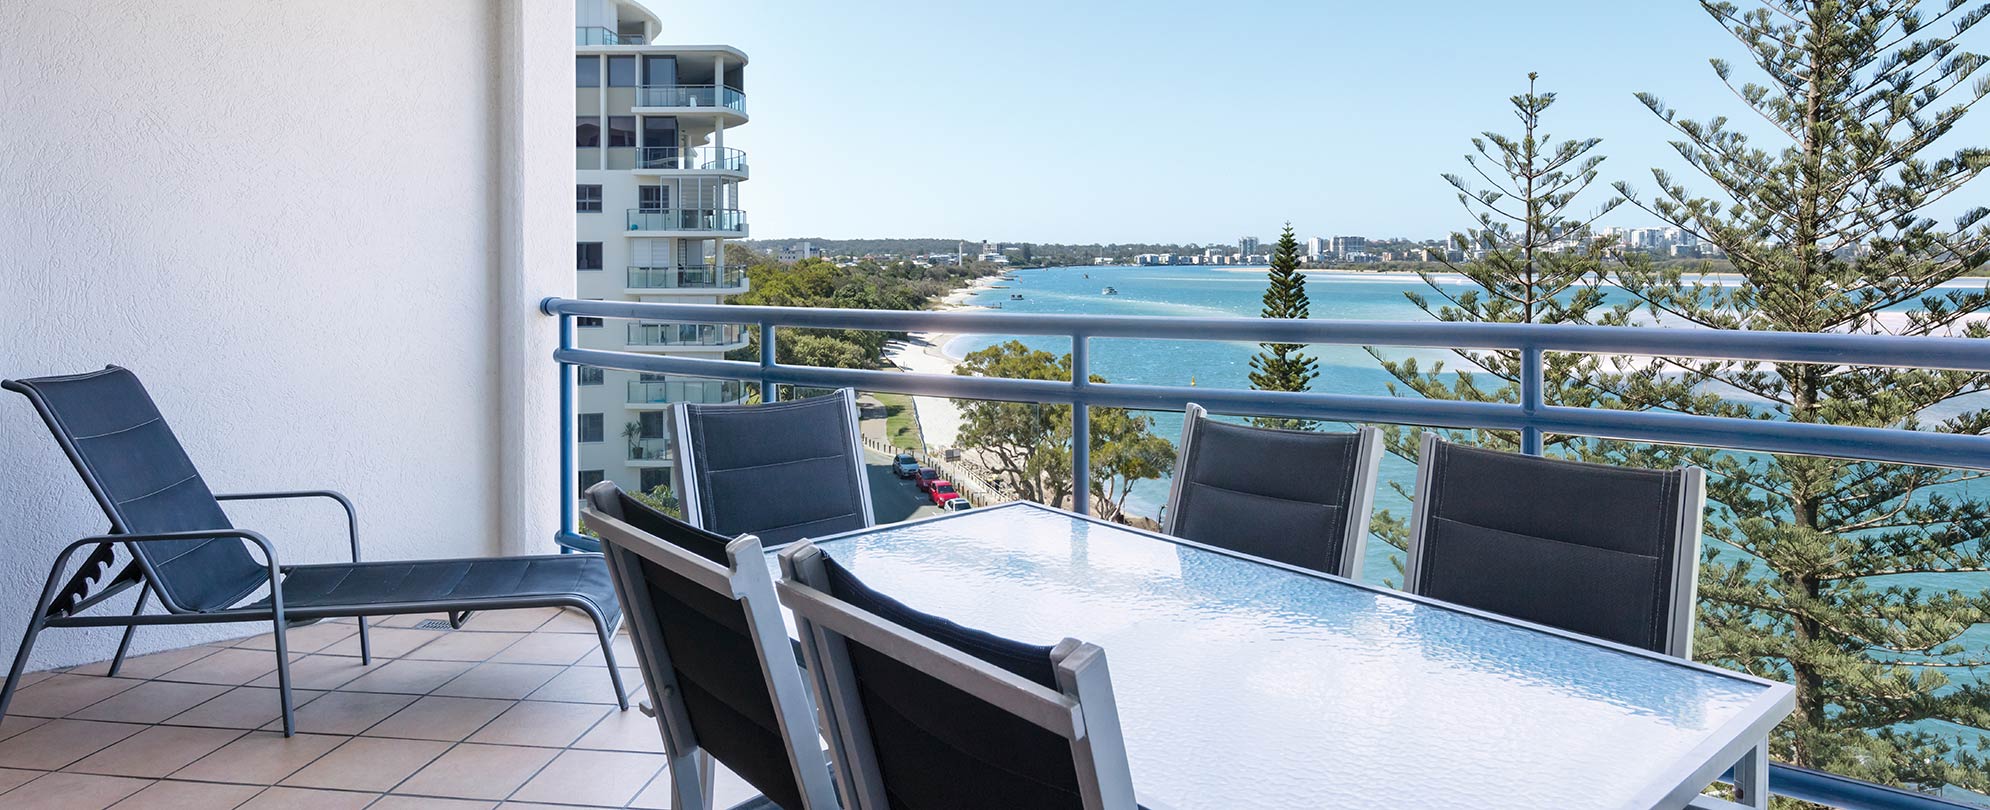 A ocean view from the 1-bedroom balcony suite at Club Wyndham Golden Beach.